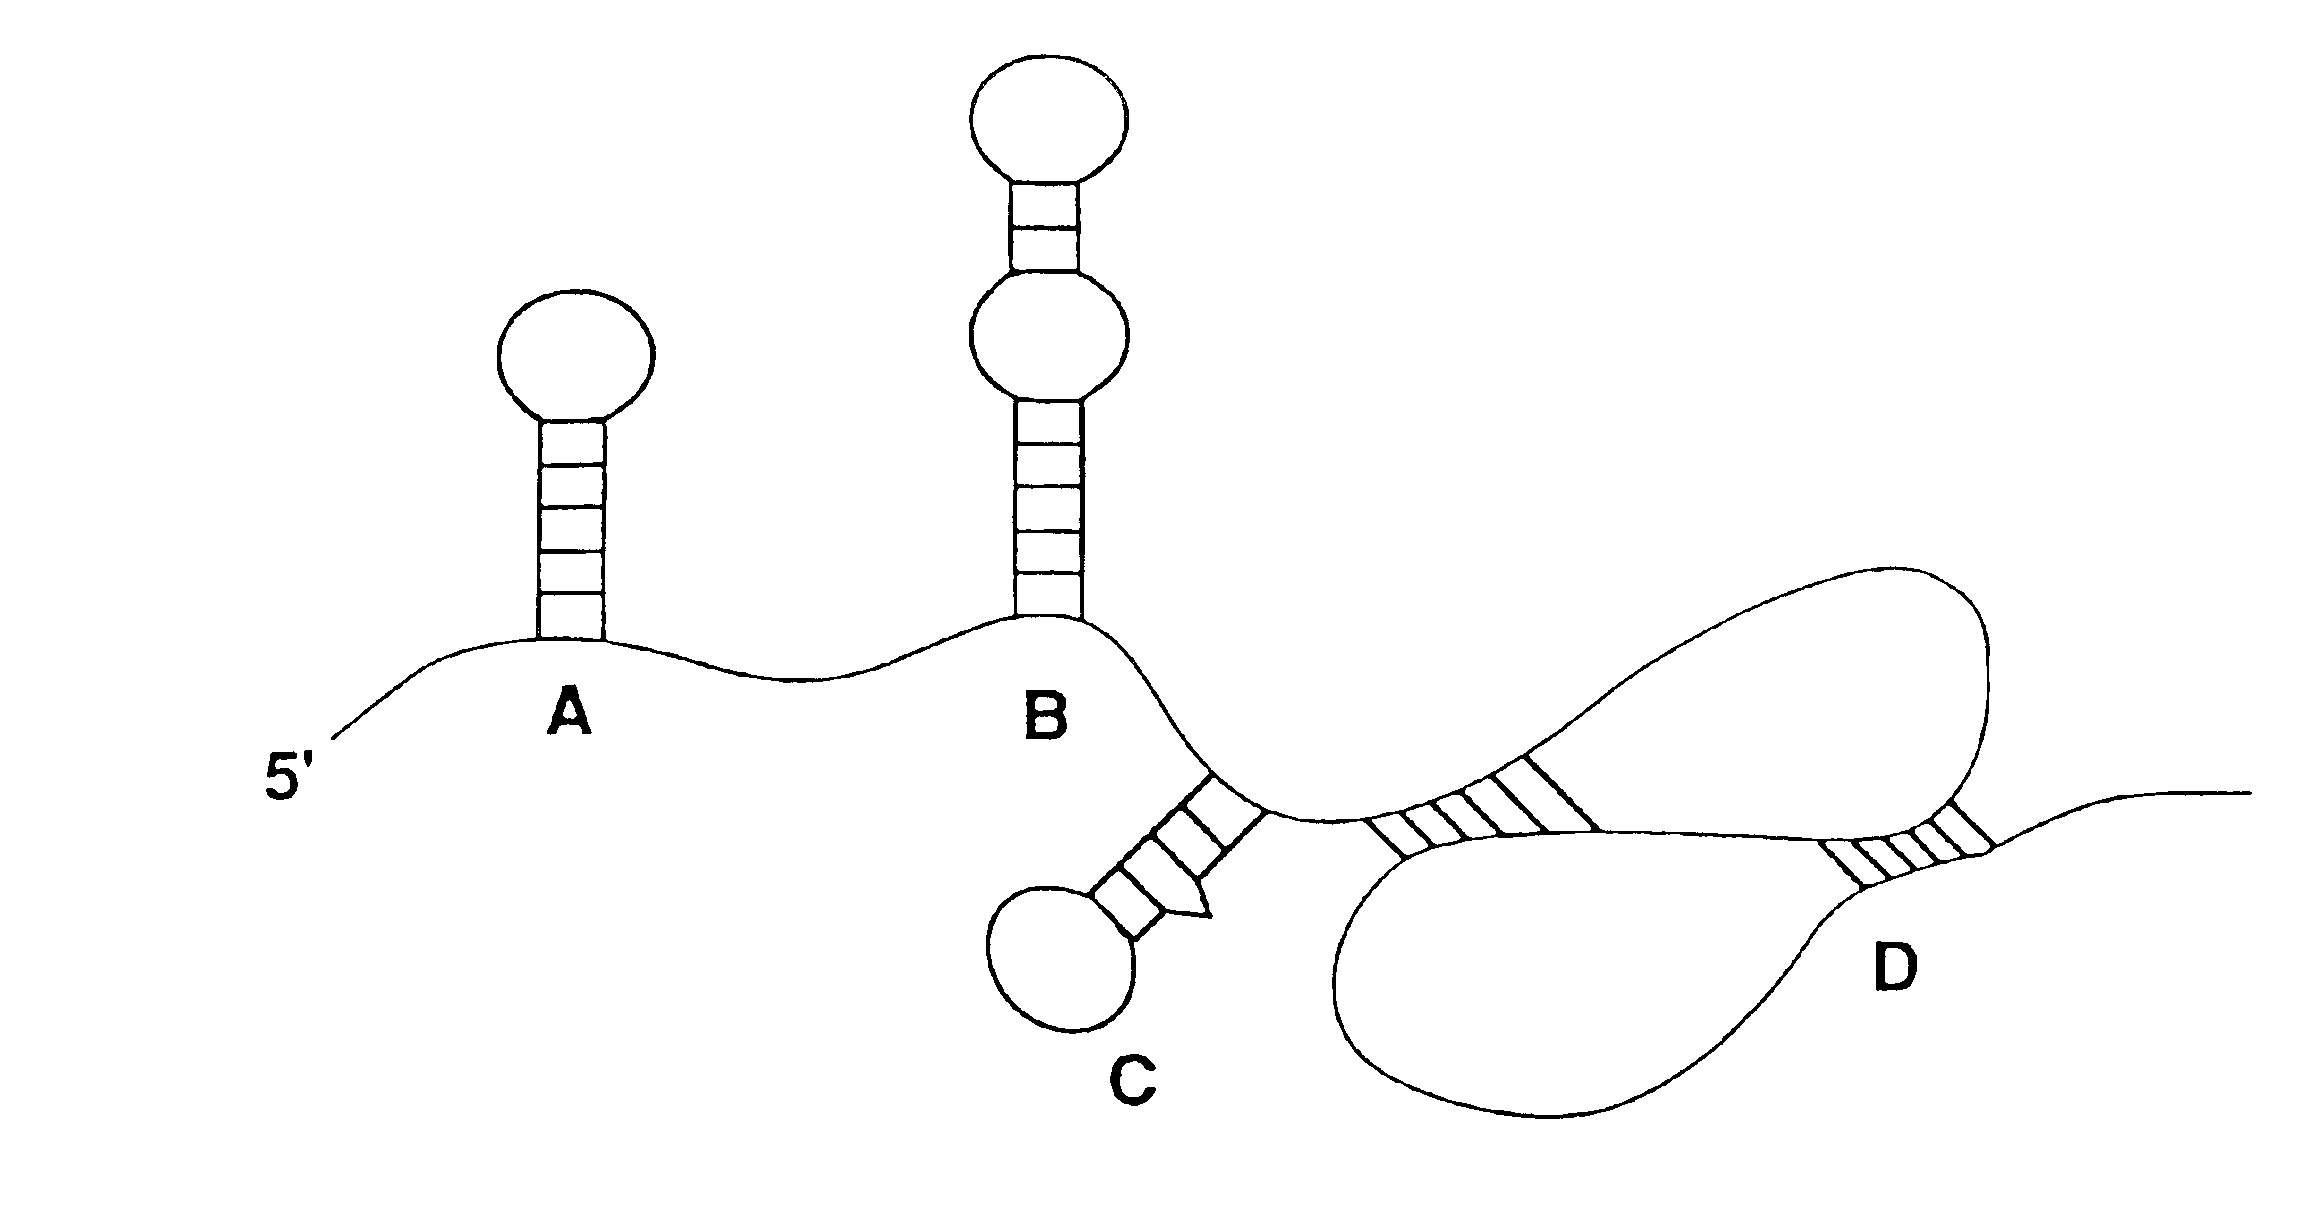 Nucleic acid ligand binding site identification